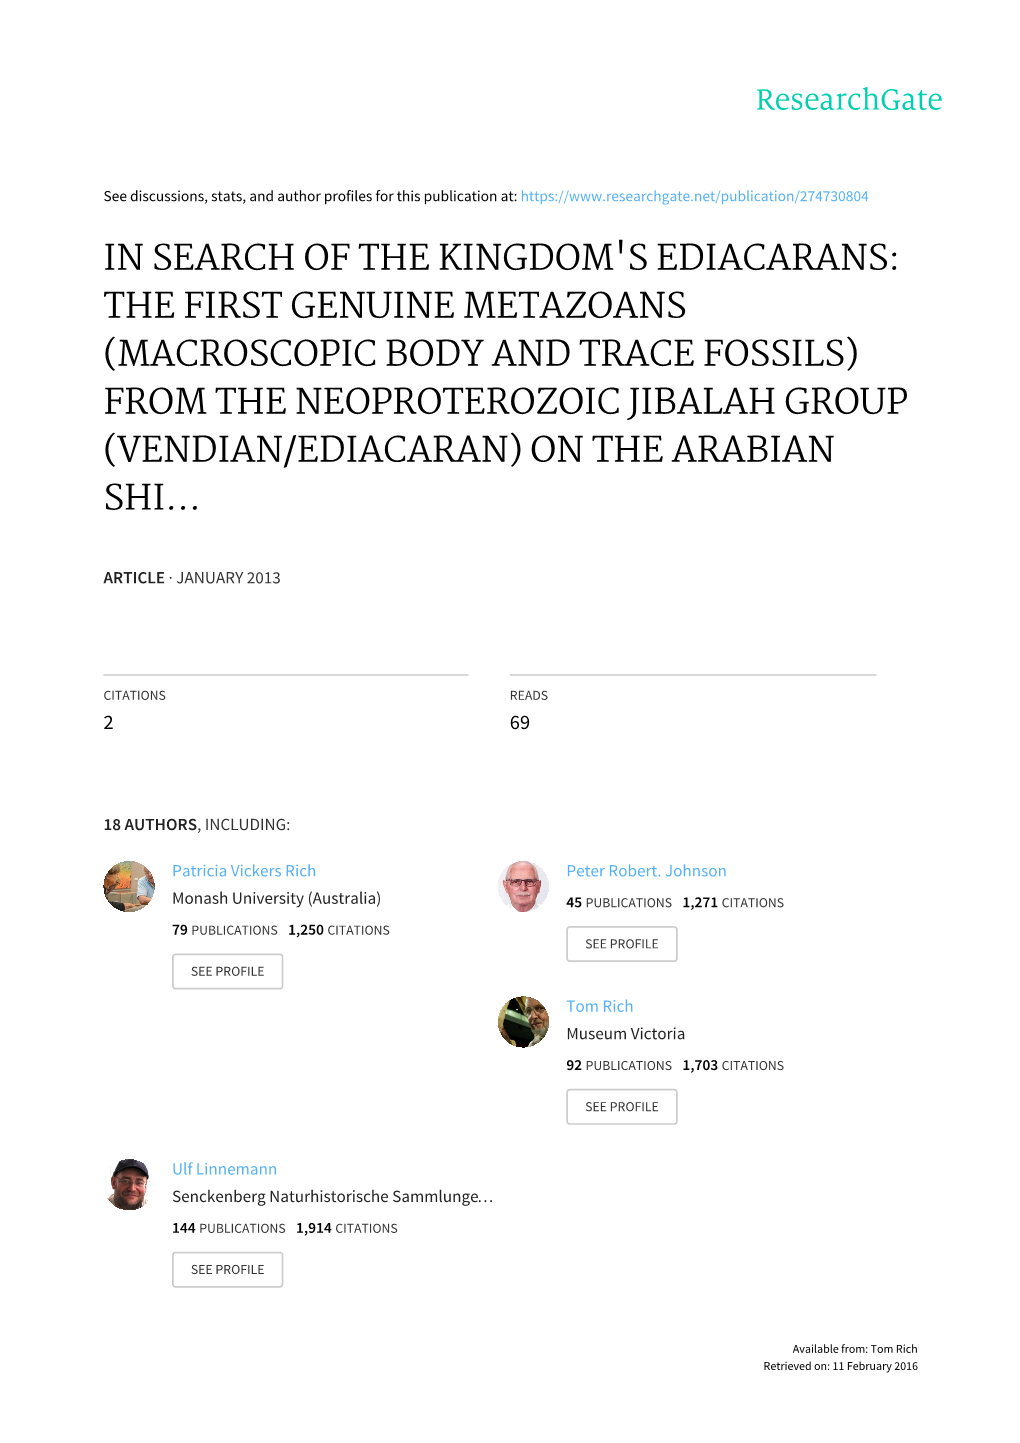 In Search of the Kingdom's Ediacarans